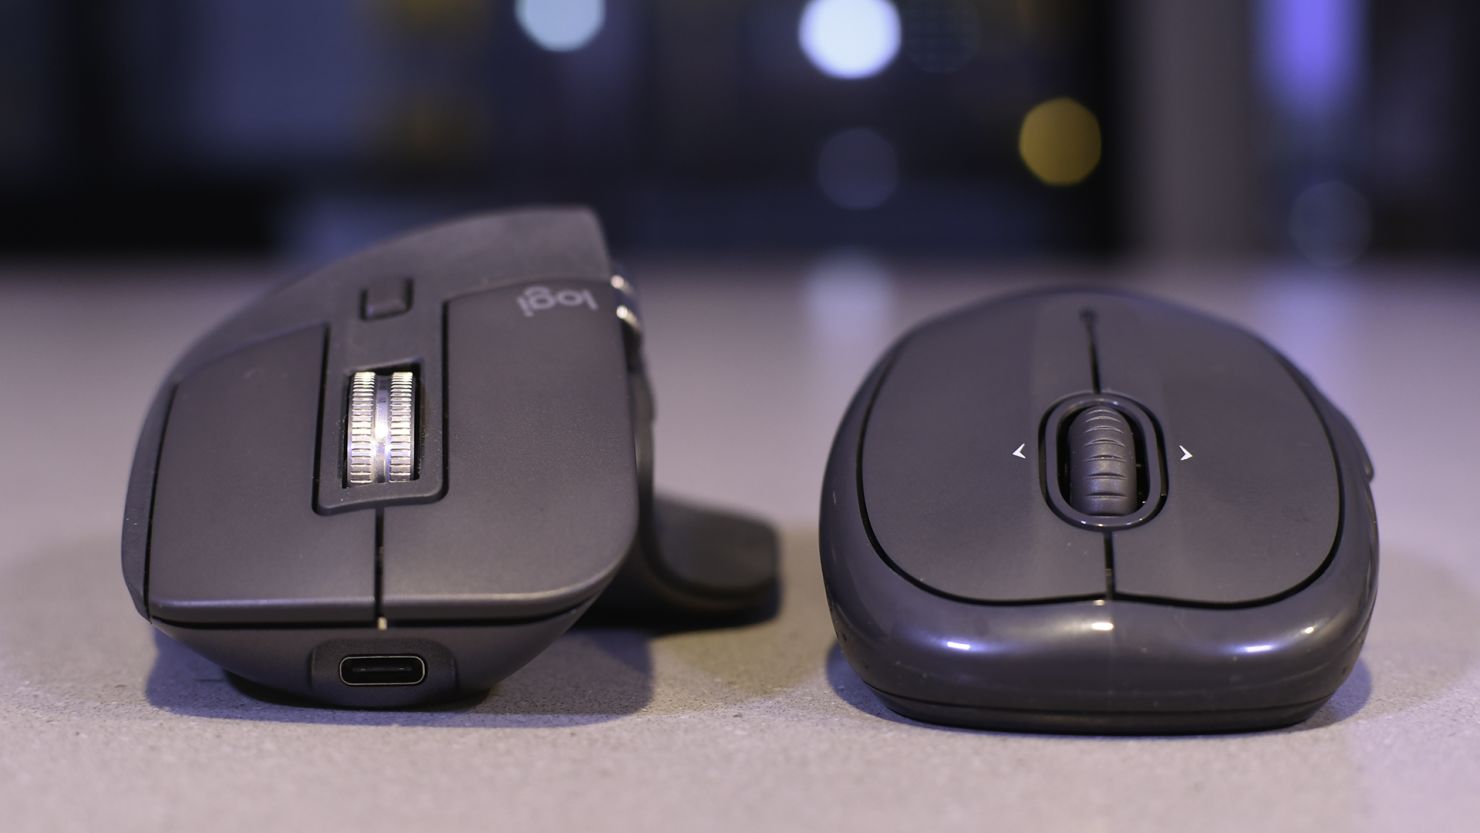 Logitech MX Master 3 review: Truly the master of mice